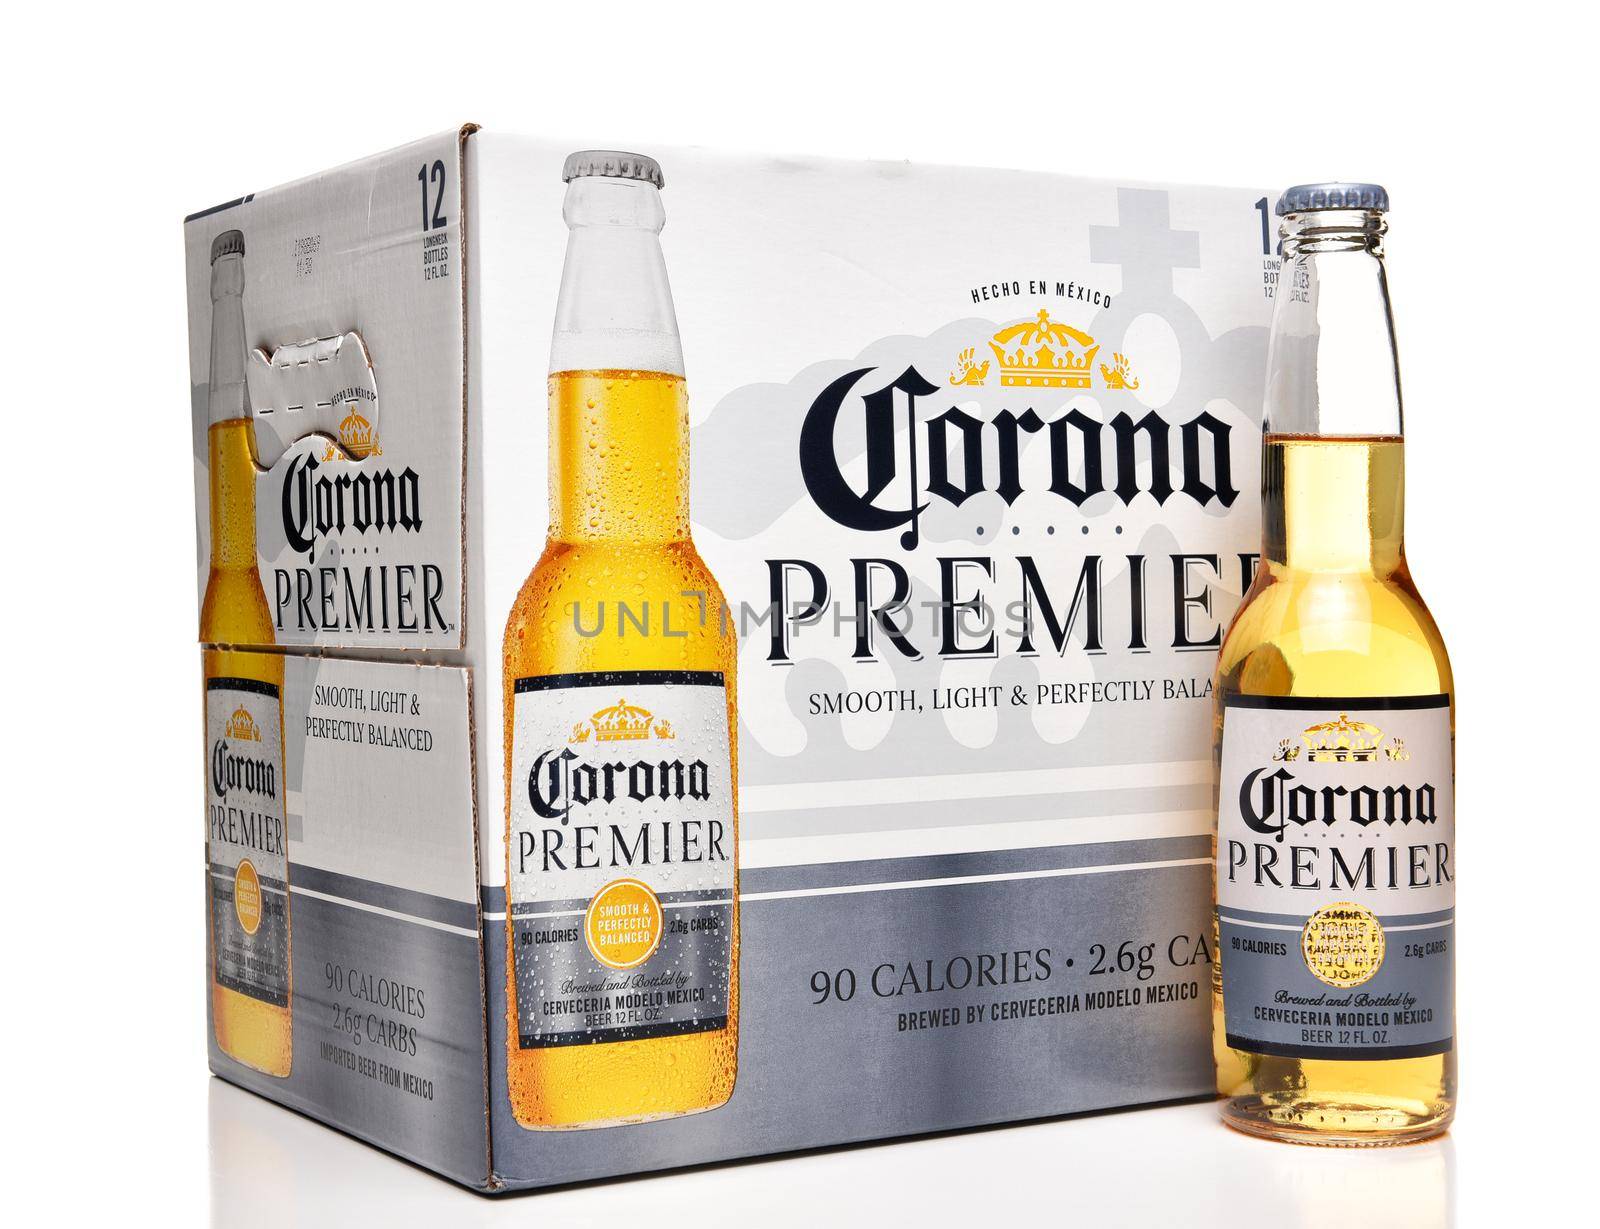 IRVINE, CALFORNIA - FEBRUARY 17, 2019: Corona Premier 12 Pack  bottles, Corona Premier is premium light beer with 2.6 grams of carbs and 90 calories. 